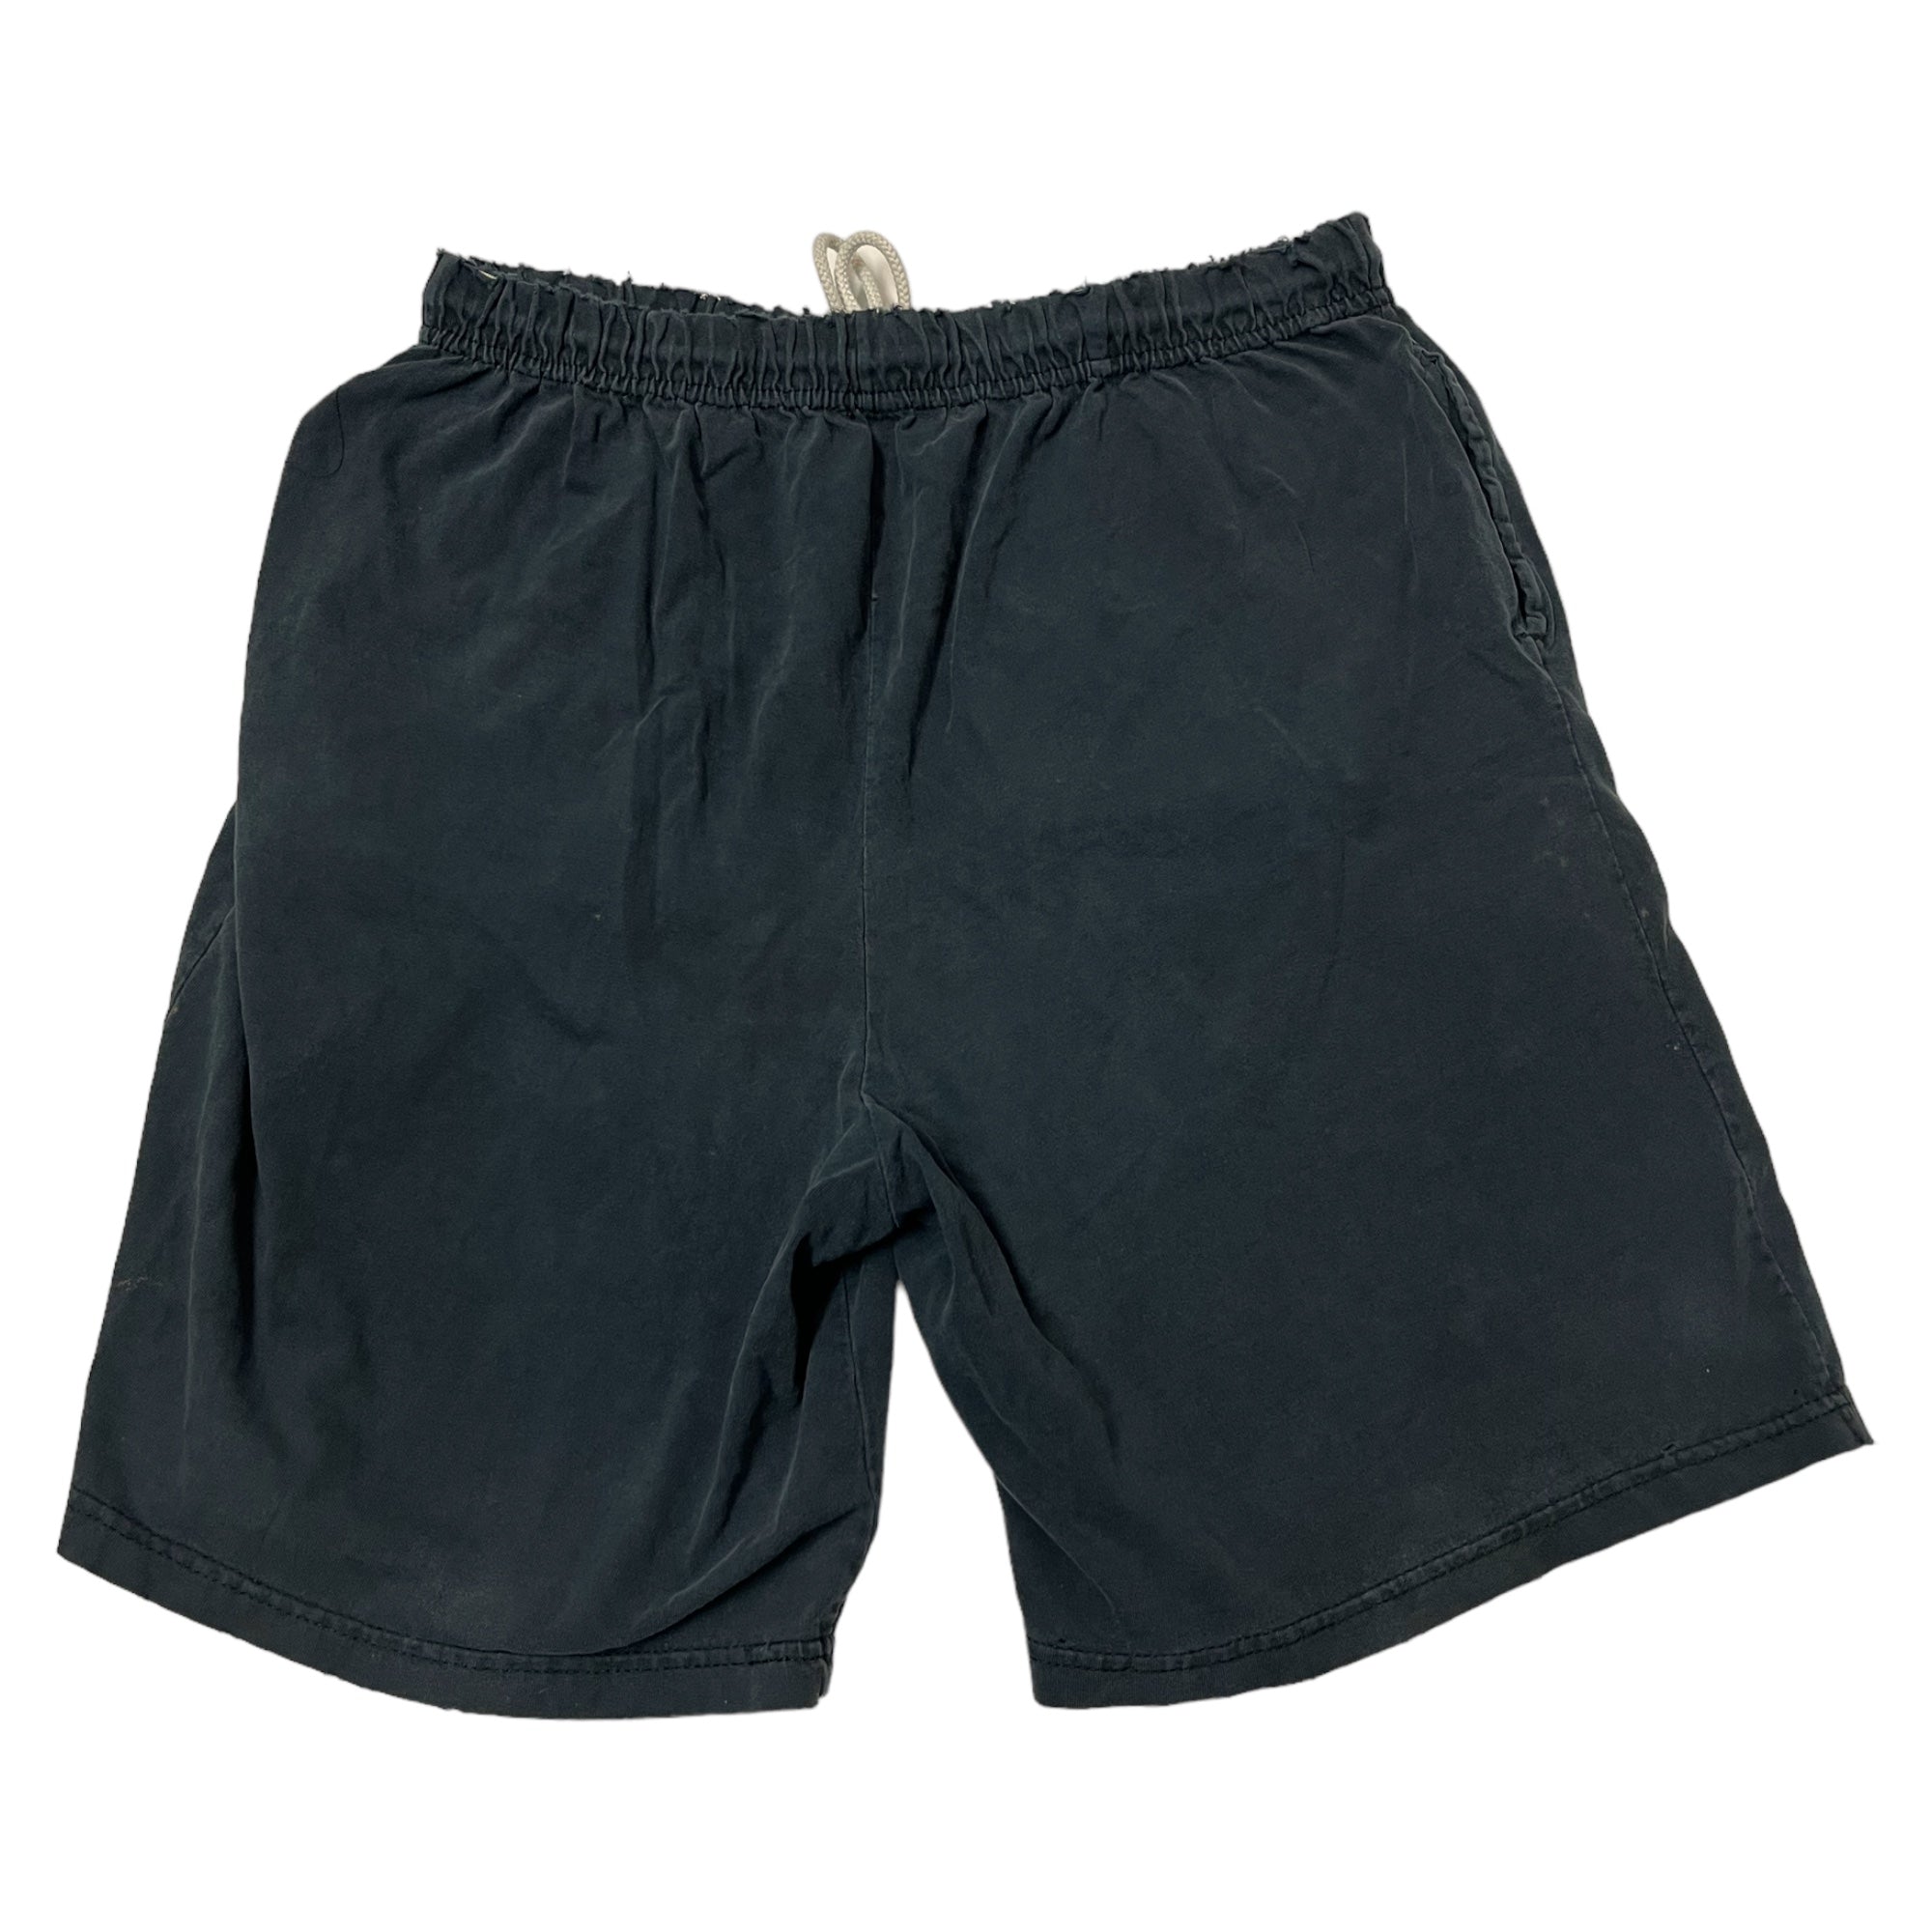 Distressed Sweat Shorts with Visible Waist Band - Faded Black - 14.5-21”